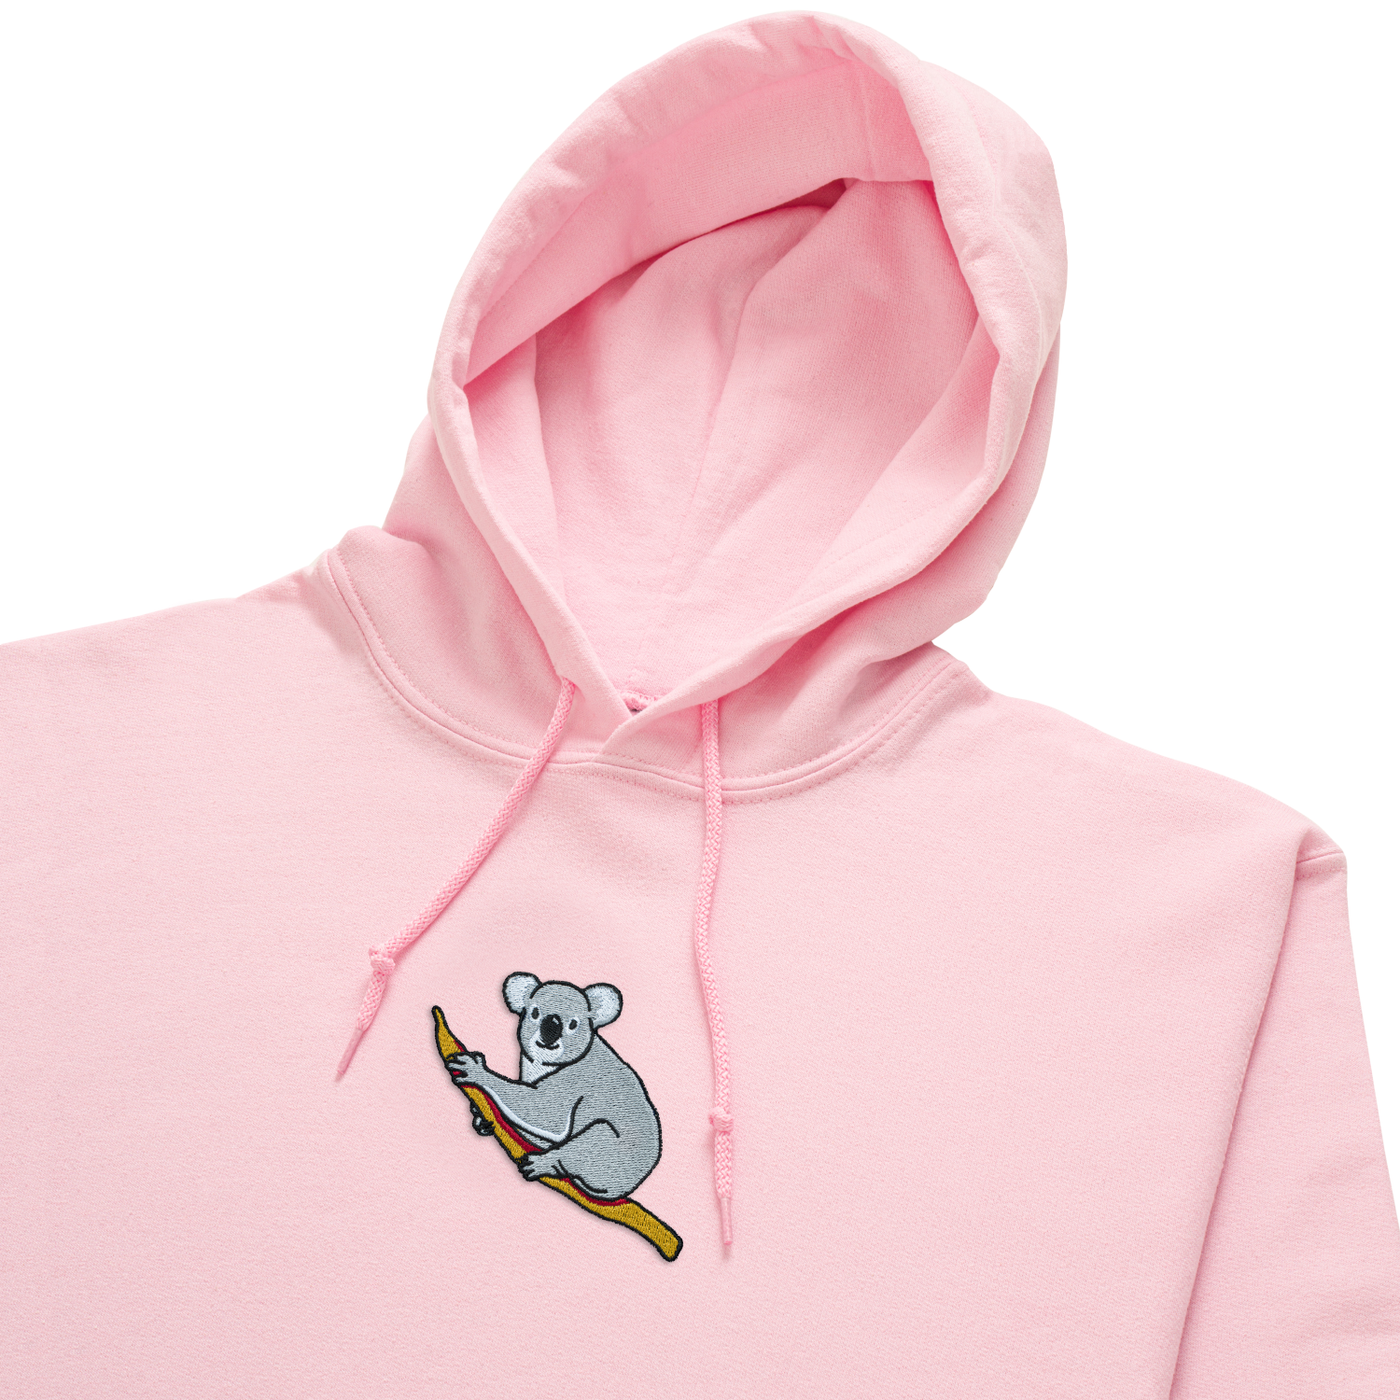 Bobby's Planet Women's Embroidered Koala Hoodie from Australia Down Under Animals Collection in Light Pink Color#color_light-pink